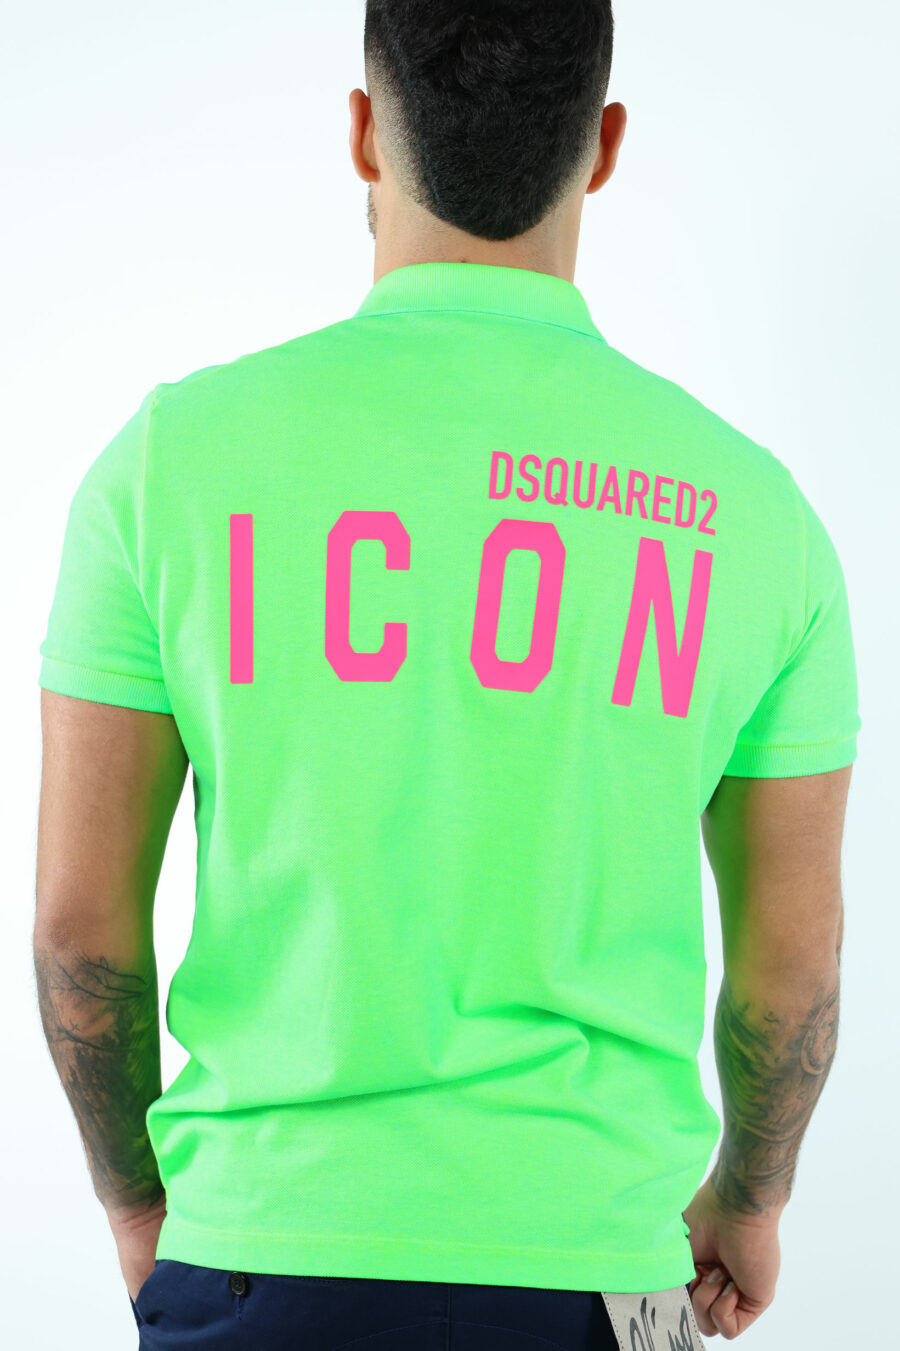 Neon green "tennis fit" polo shirt with "icon" logo on the back - 106699